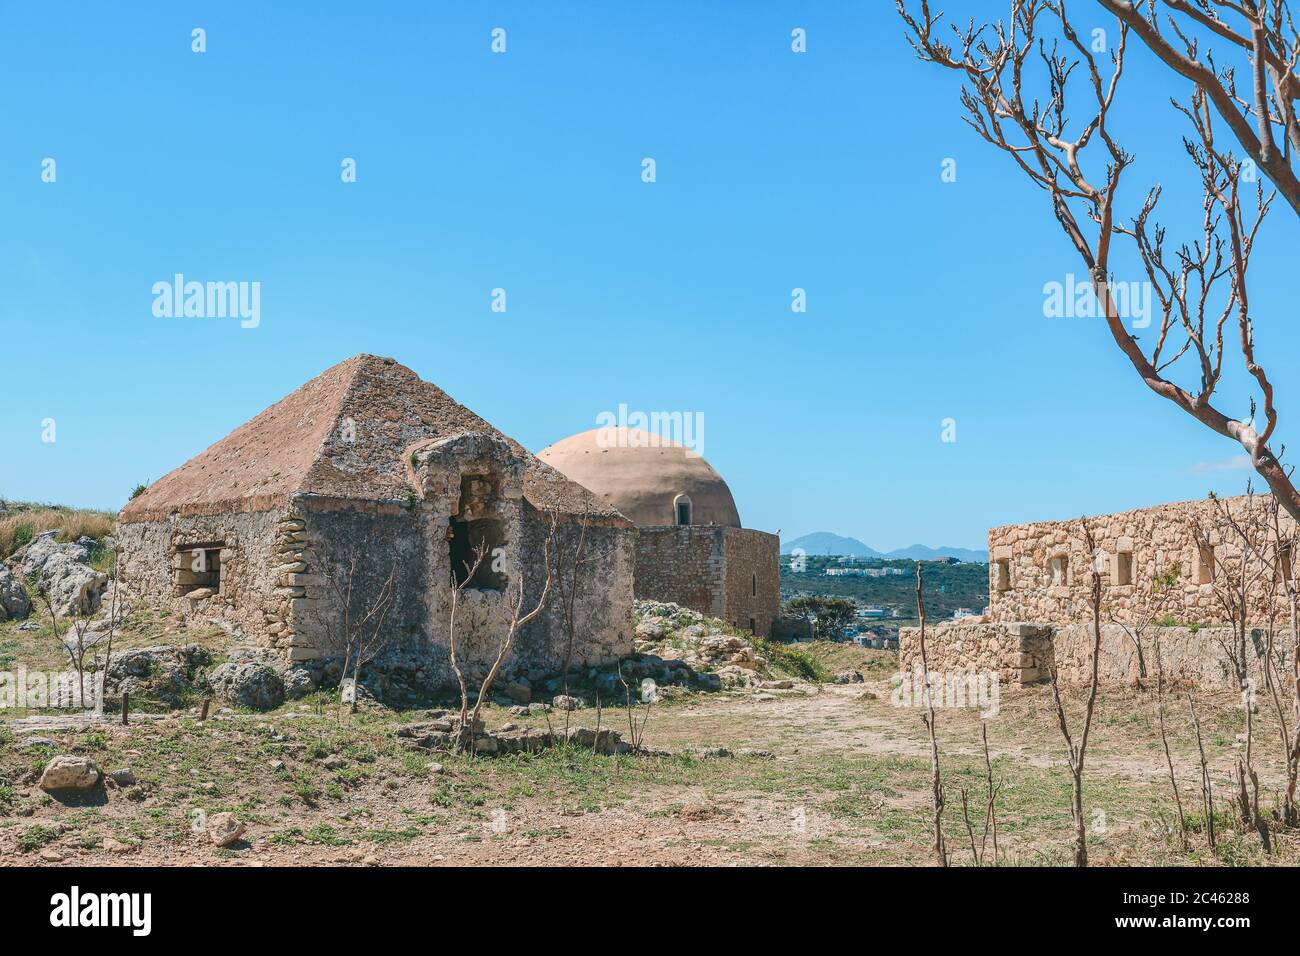 Fortezza Rethymno - Fortress in Rethymno on the island of Crete Stock Photo